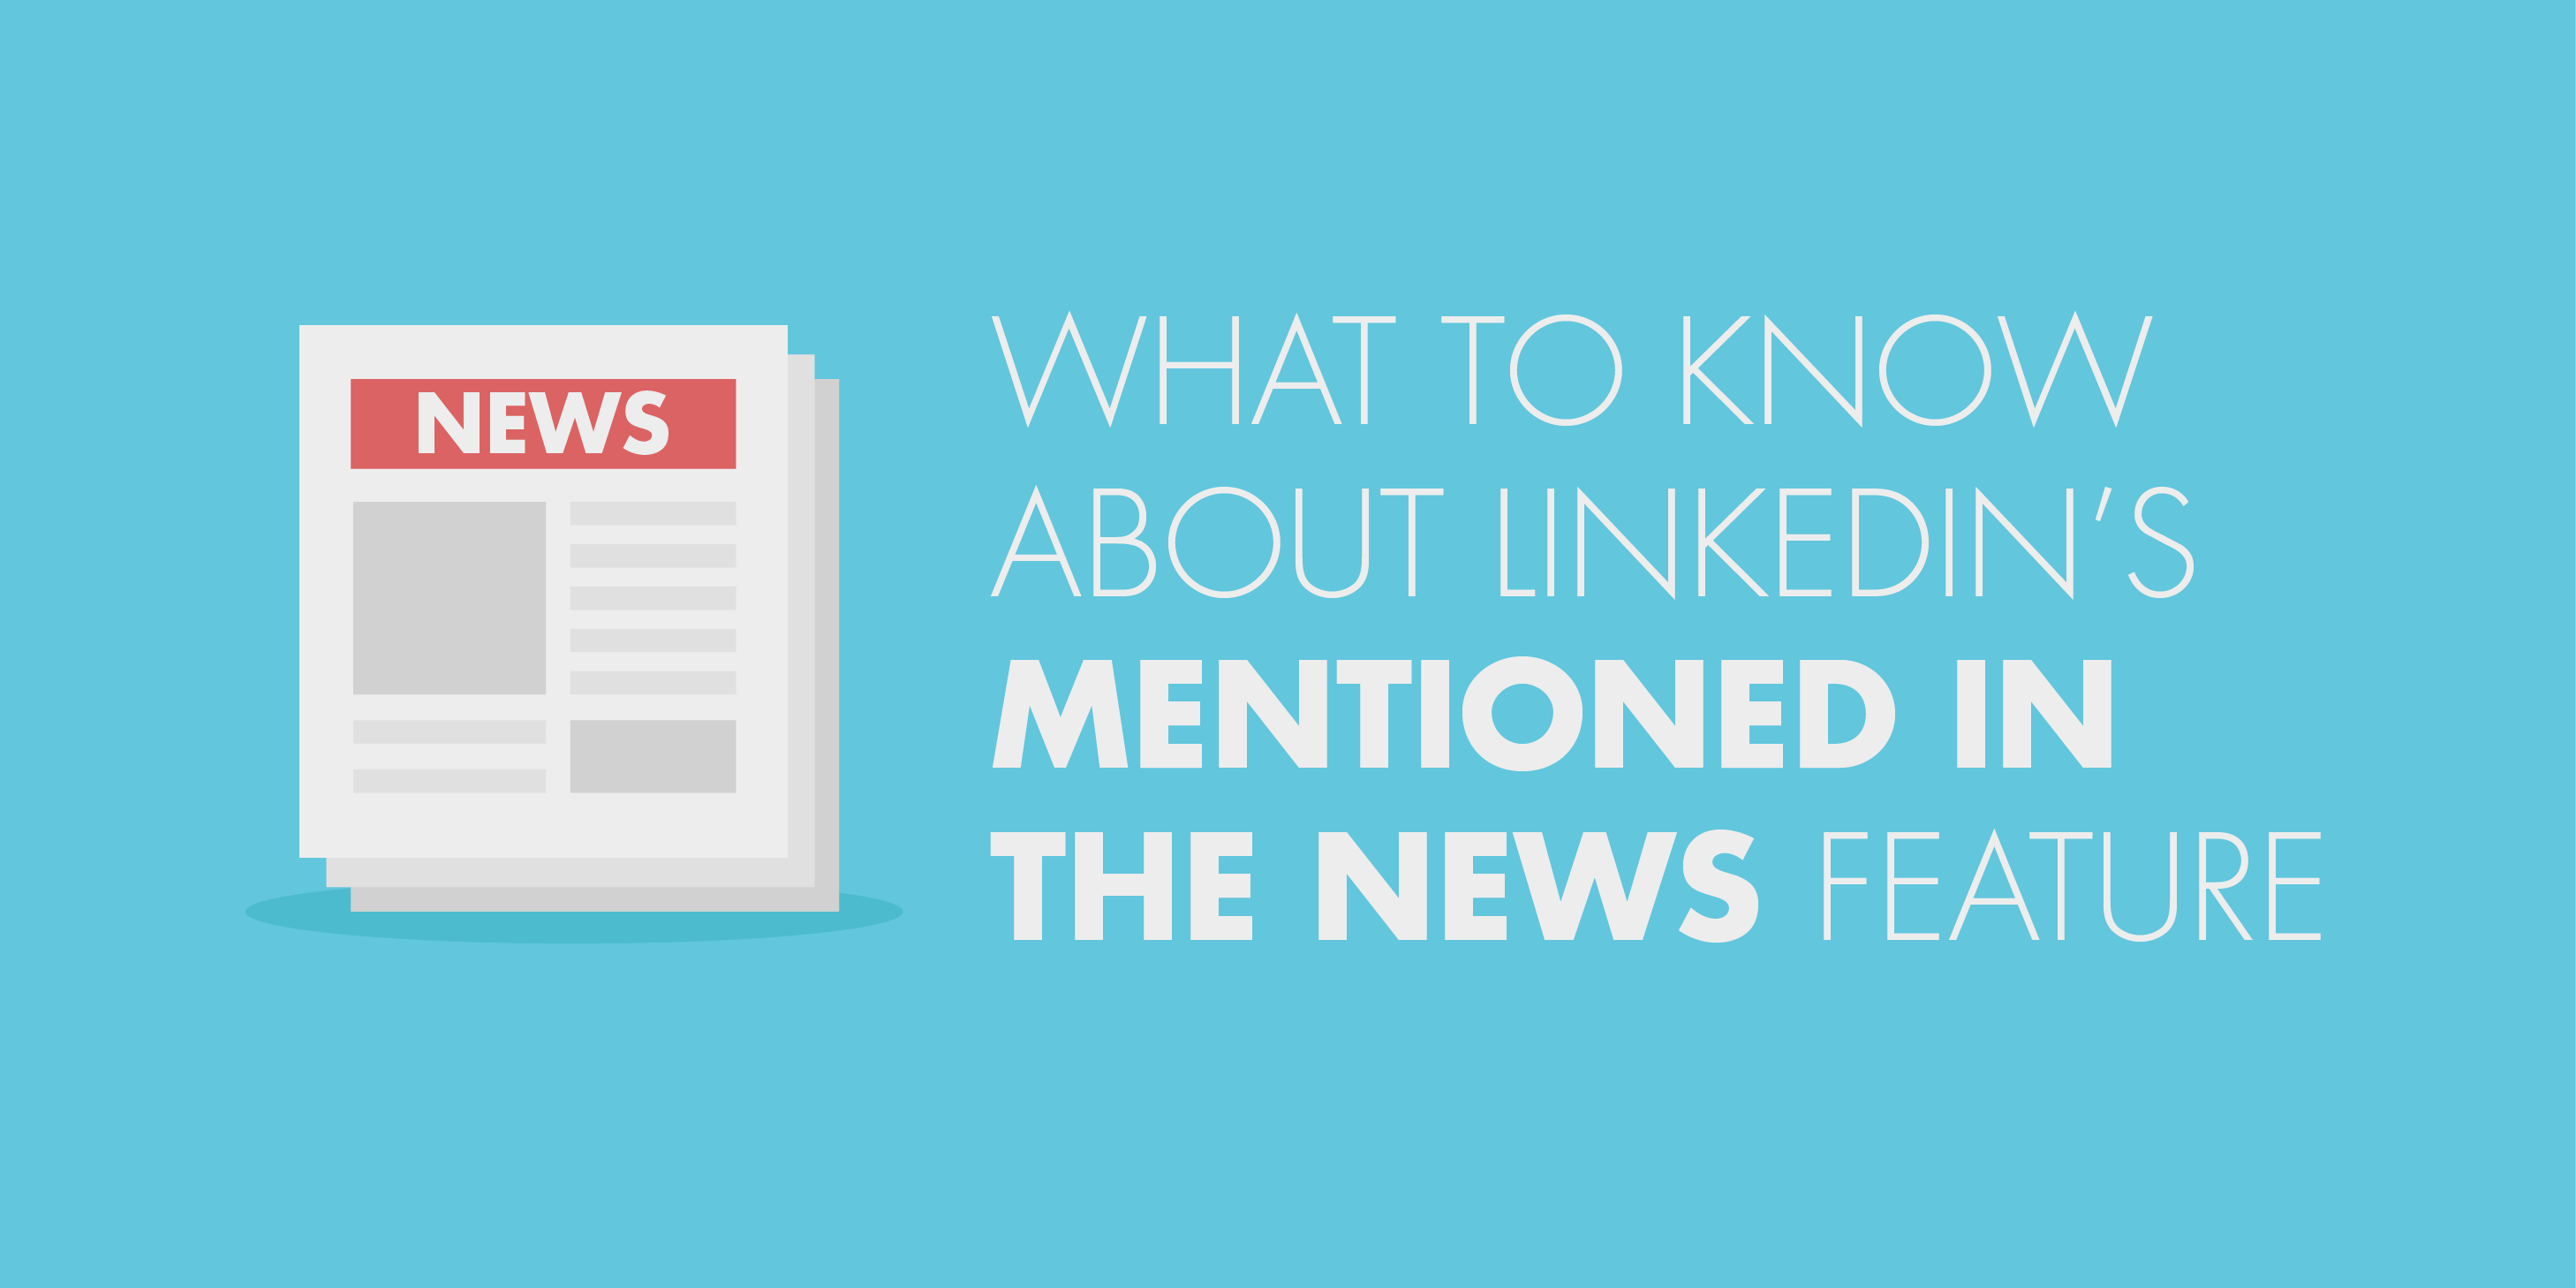 What to Know About LinkedIn’s “Mentioned in the News” Feature